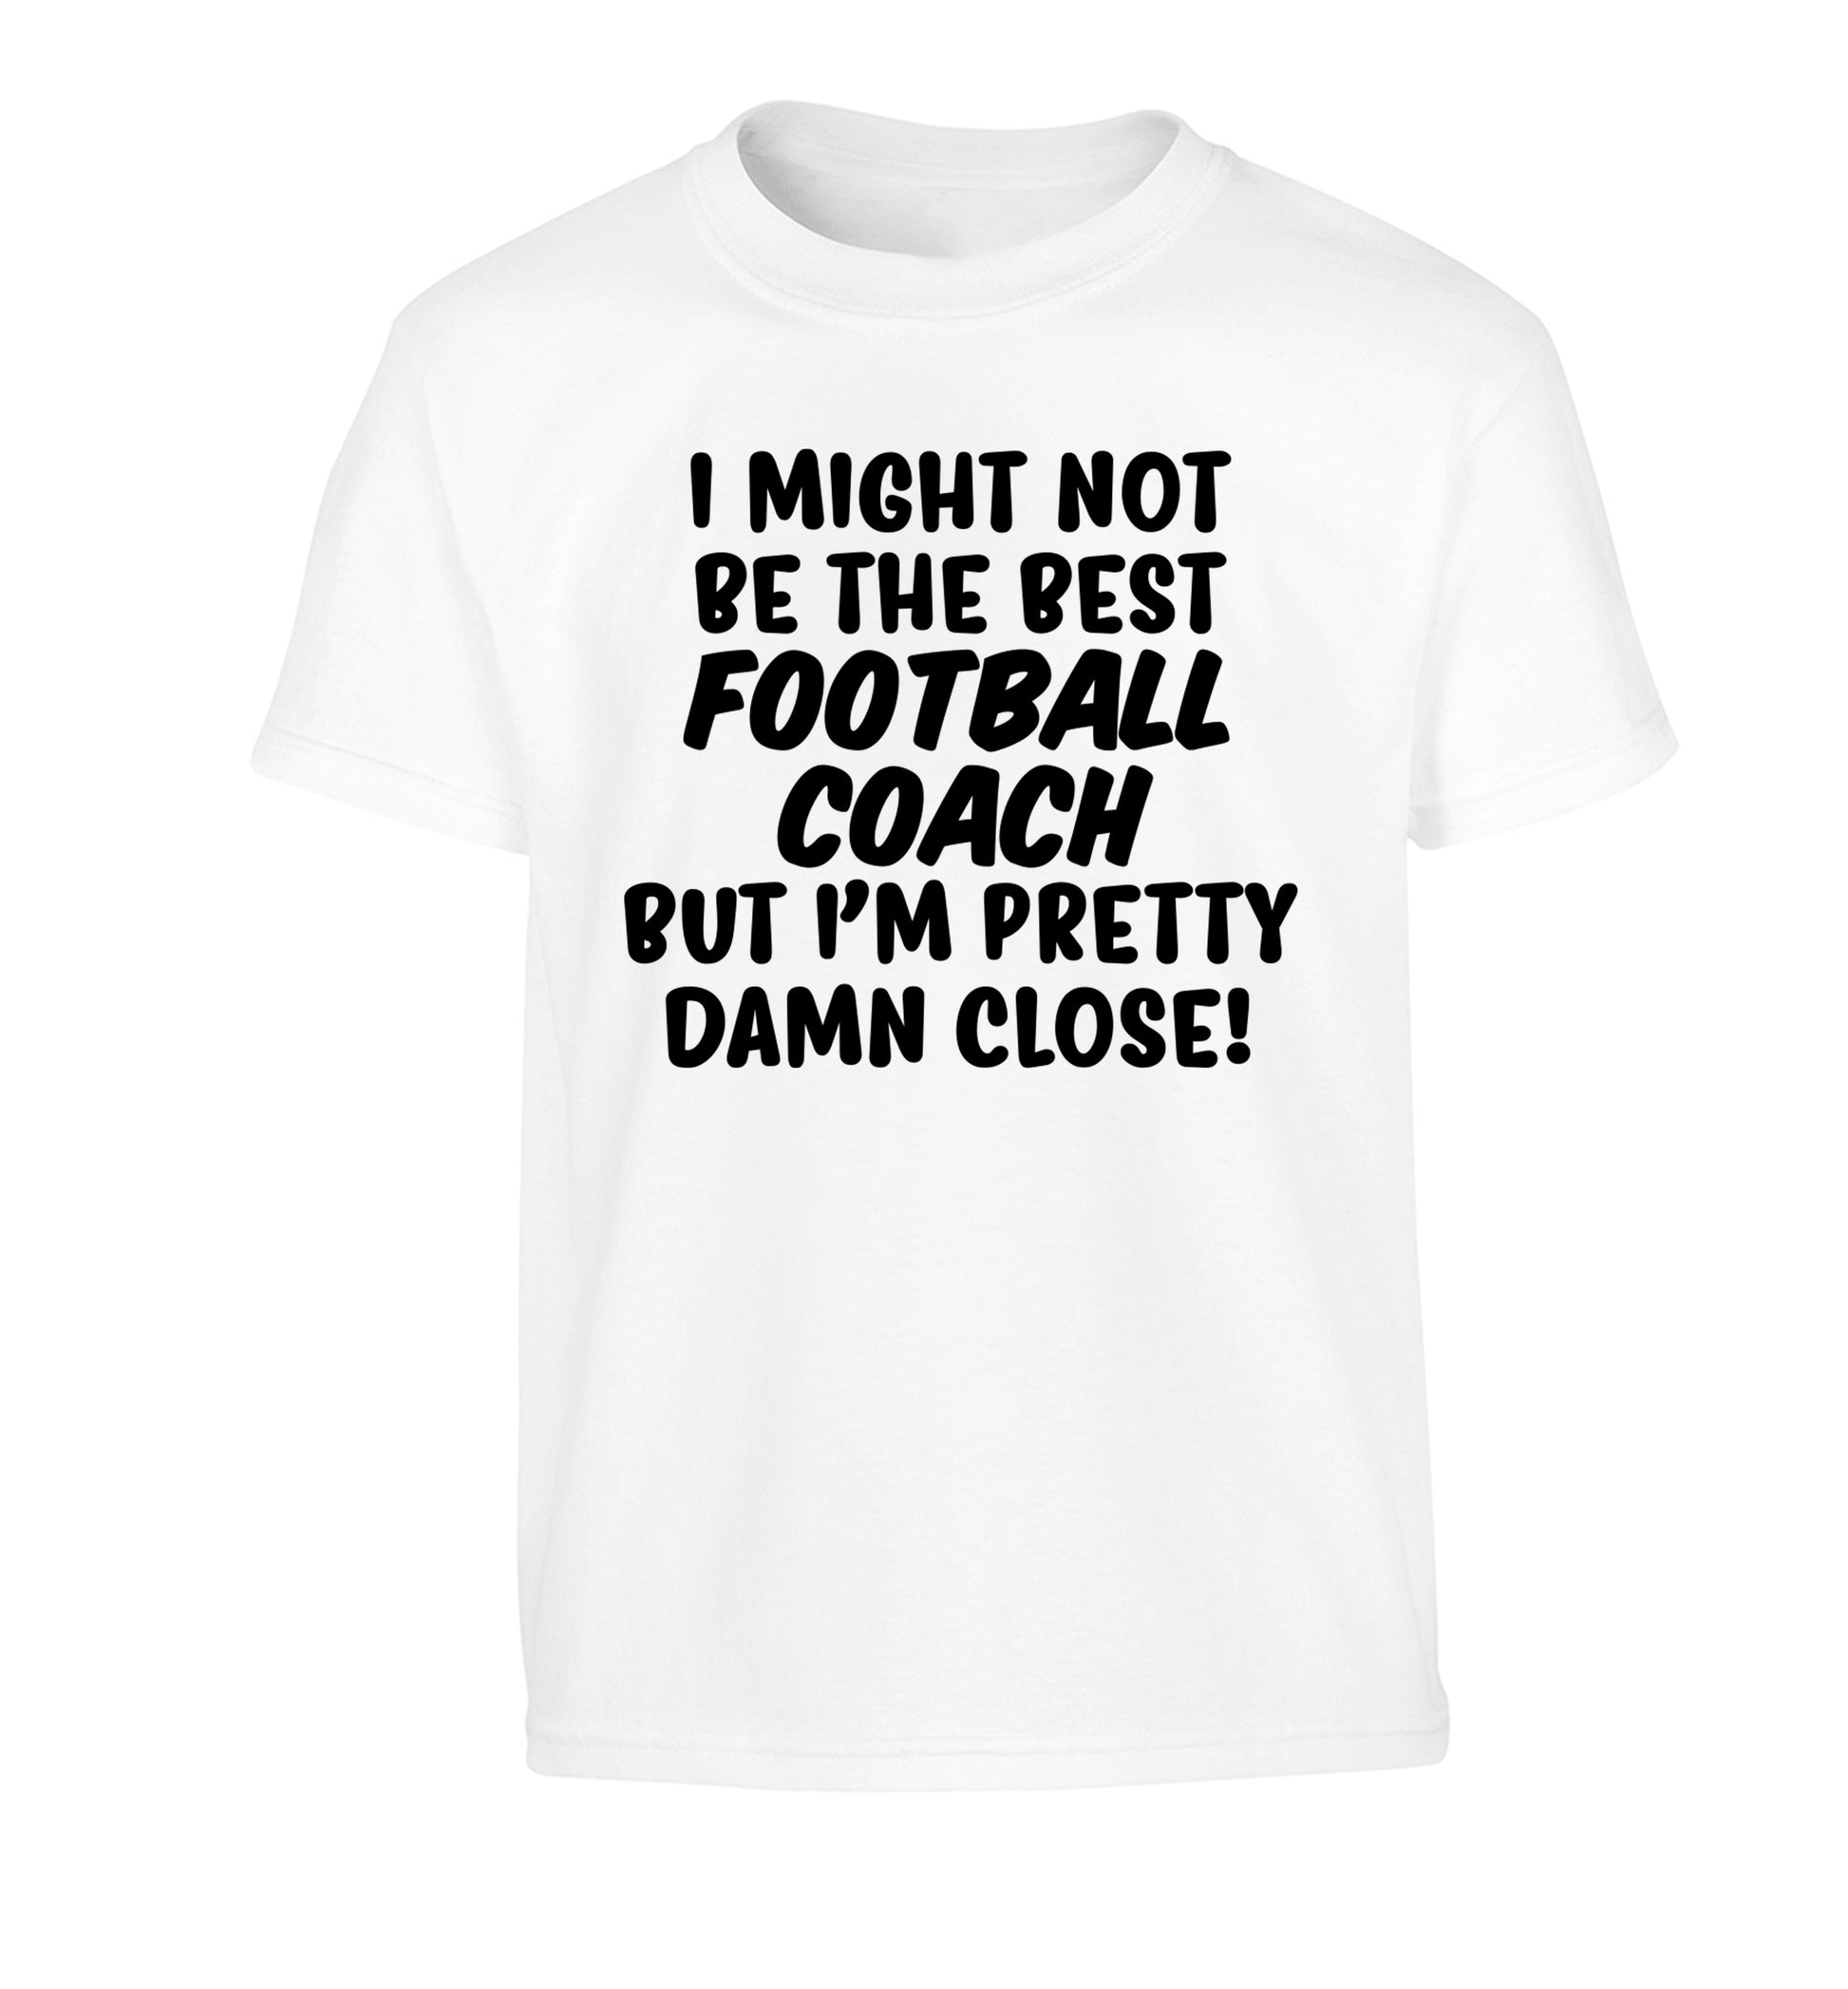 I might not be the best football coach but I'm pretty close! Children's white Tshirt 12-14 Years